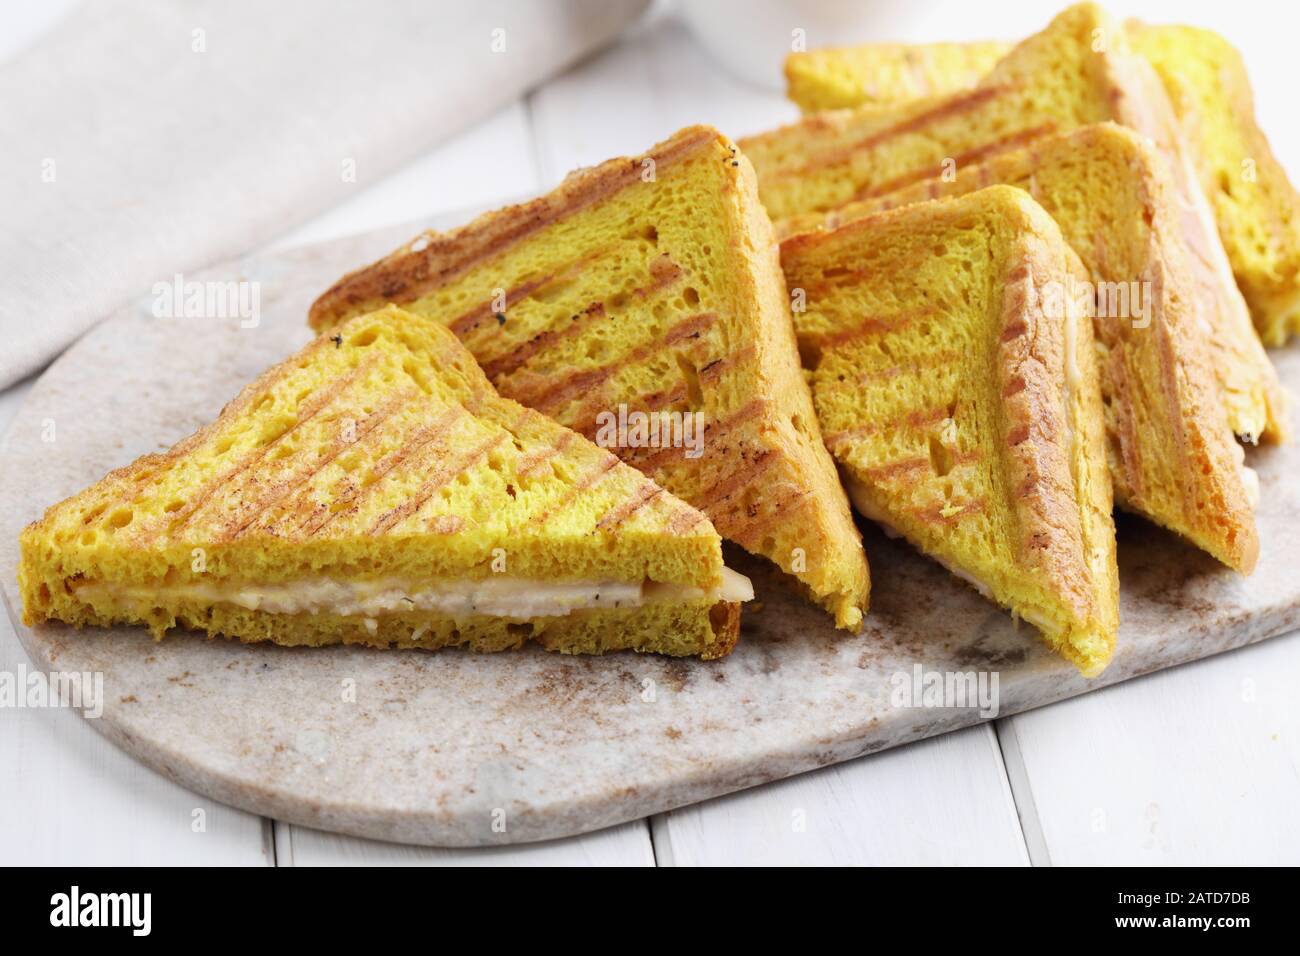 Grilled sandwiches with ham and cheese on a marble cutting board. Toast bread with curcuma gives a bright yellow color Stock Photo